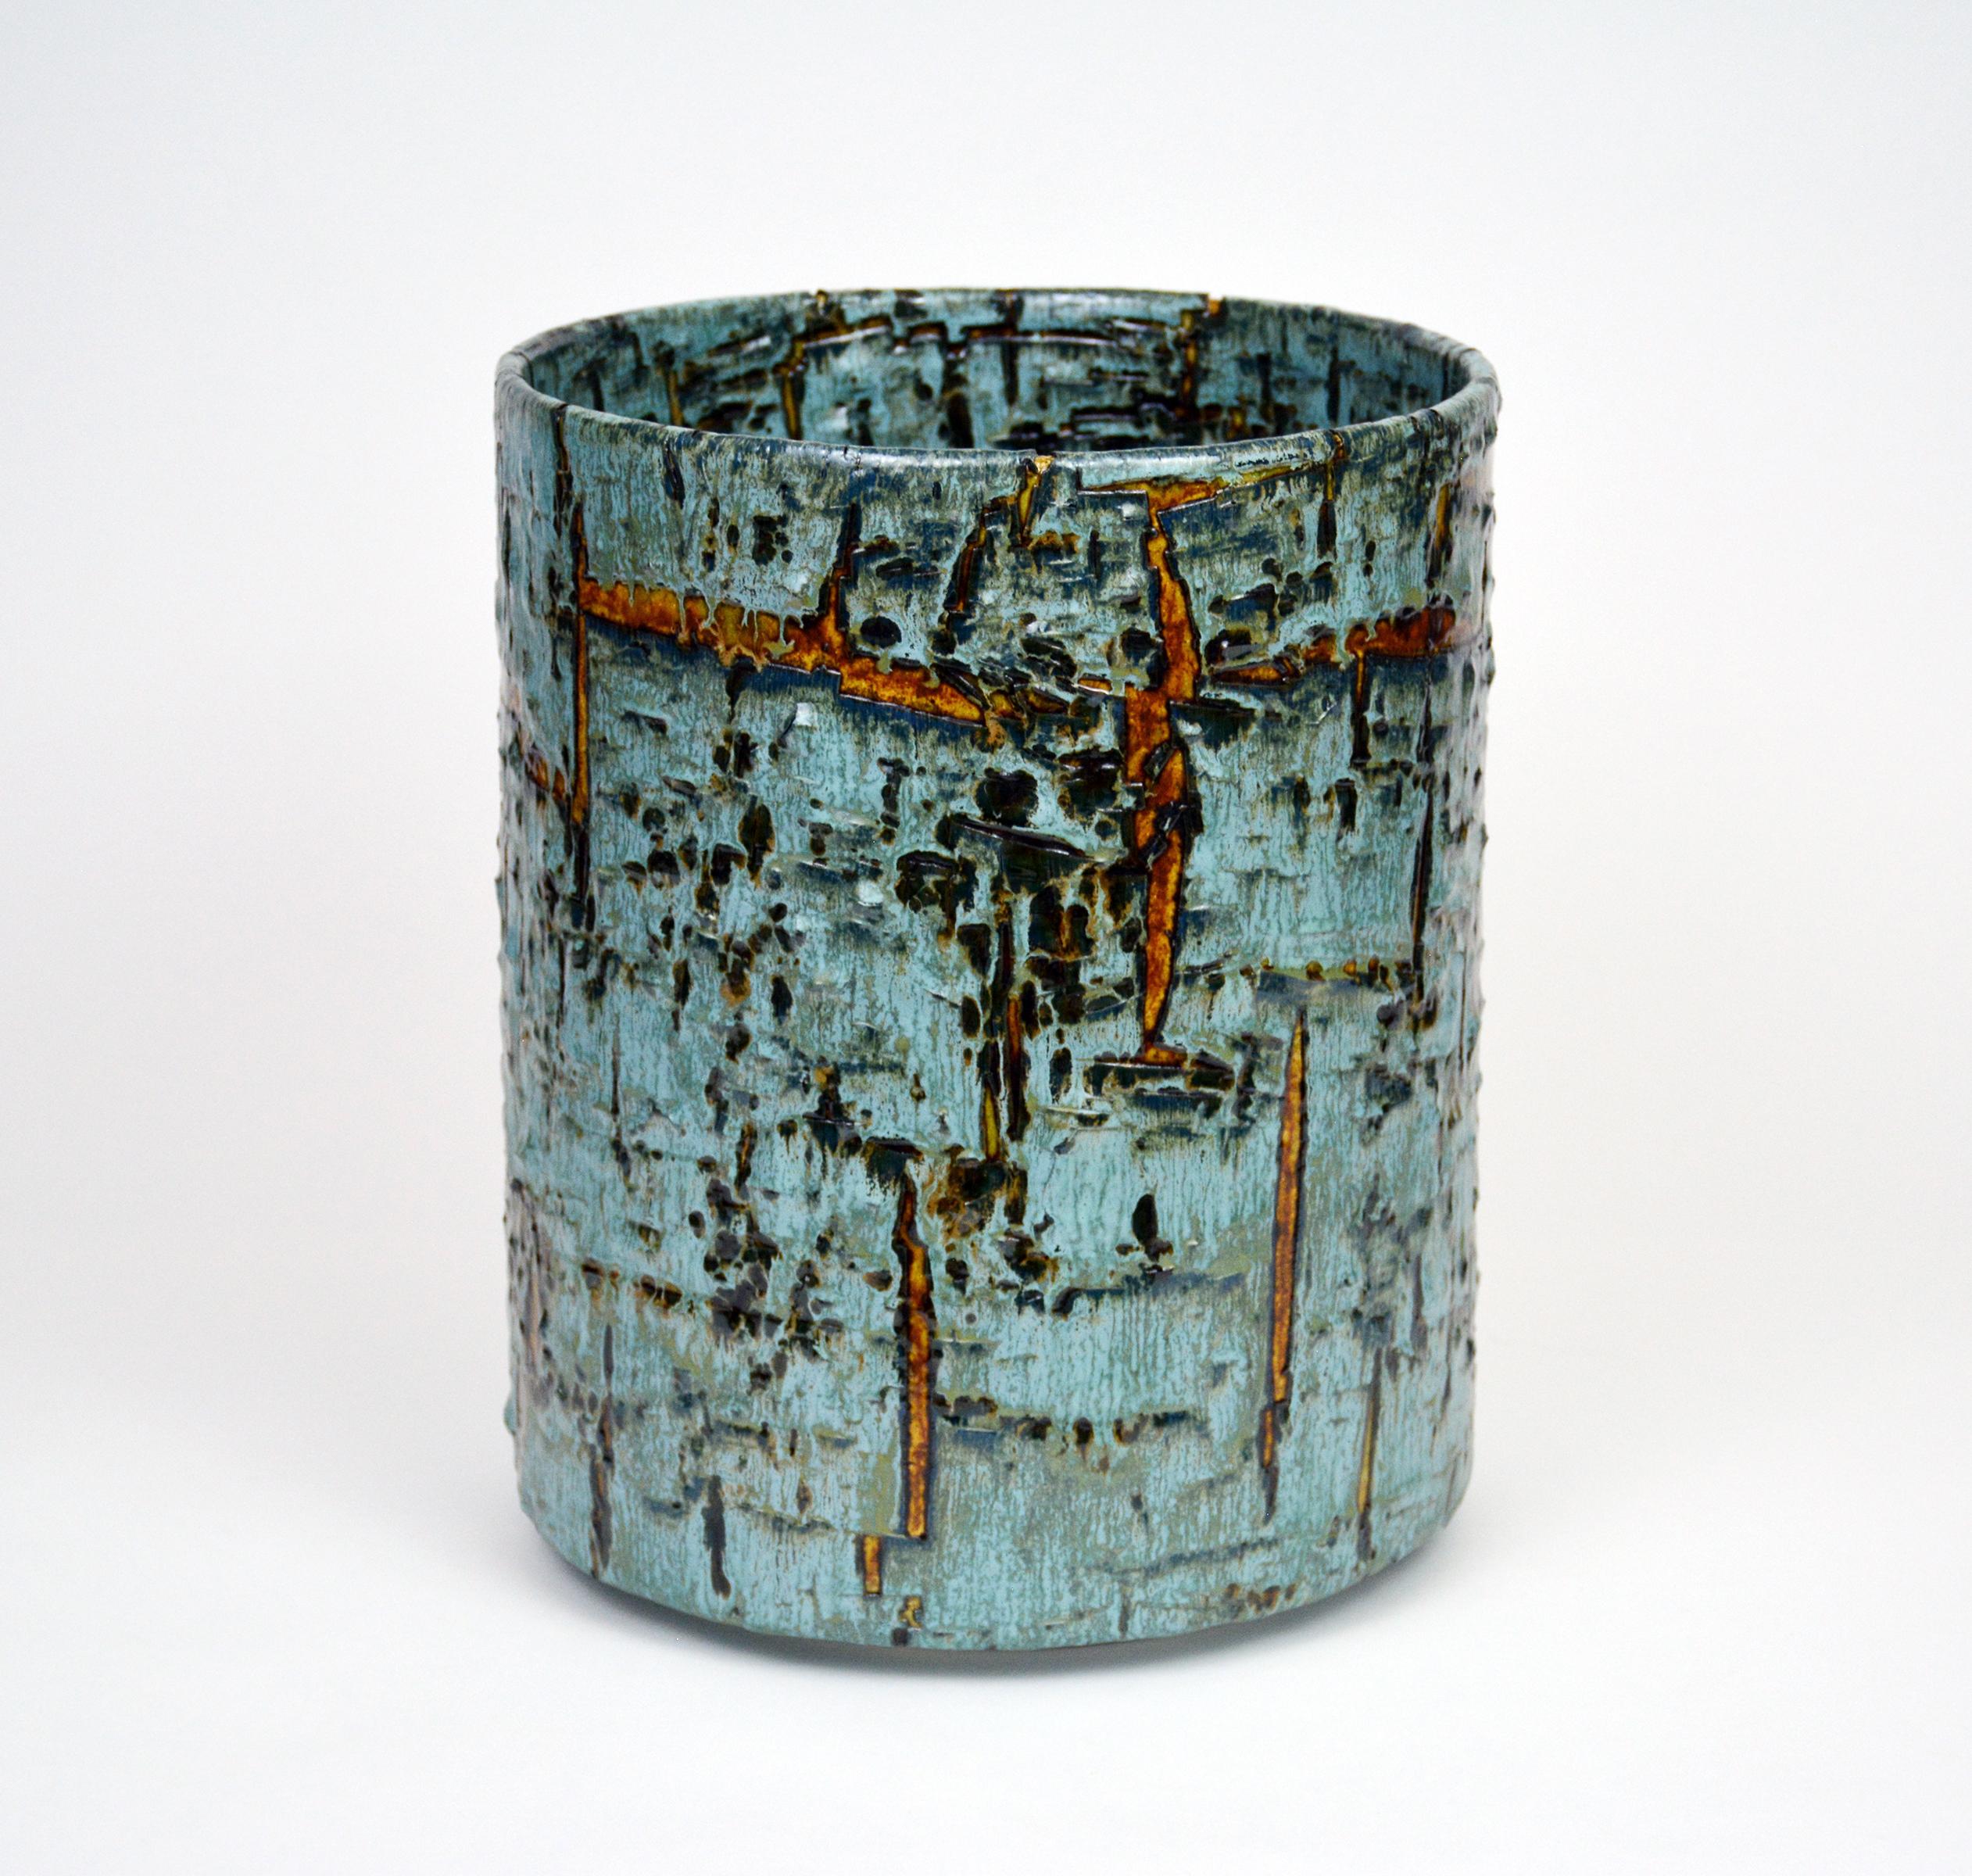 Glazed ceramic cylindrical sculpture by William Edwards
Hand built earthenware vessel, fired multiple times to achieve a textured surface of random abstraction, in hues of blue with amber gloss glaze breaking through.

William received his BFA in